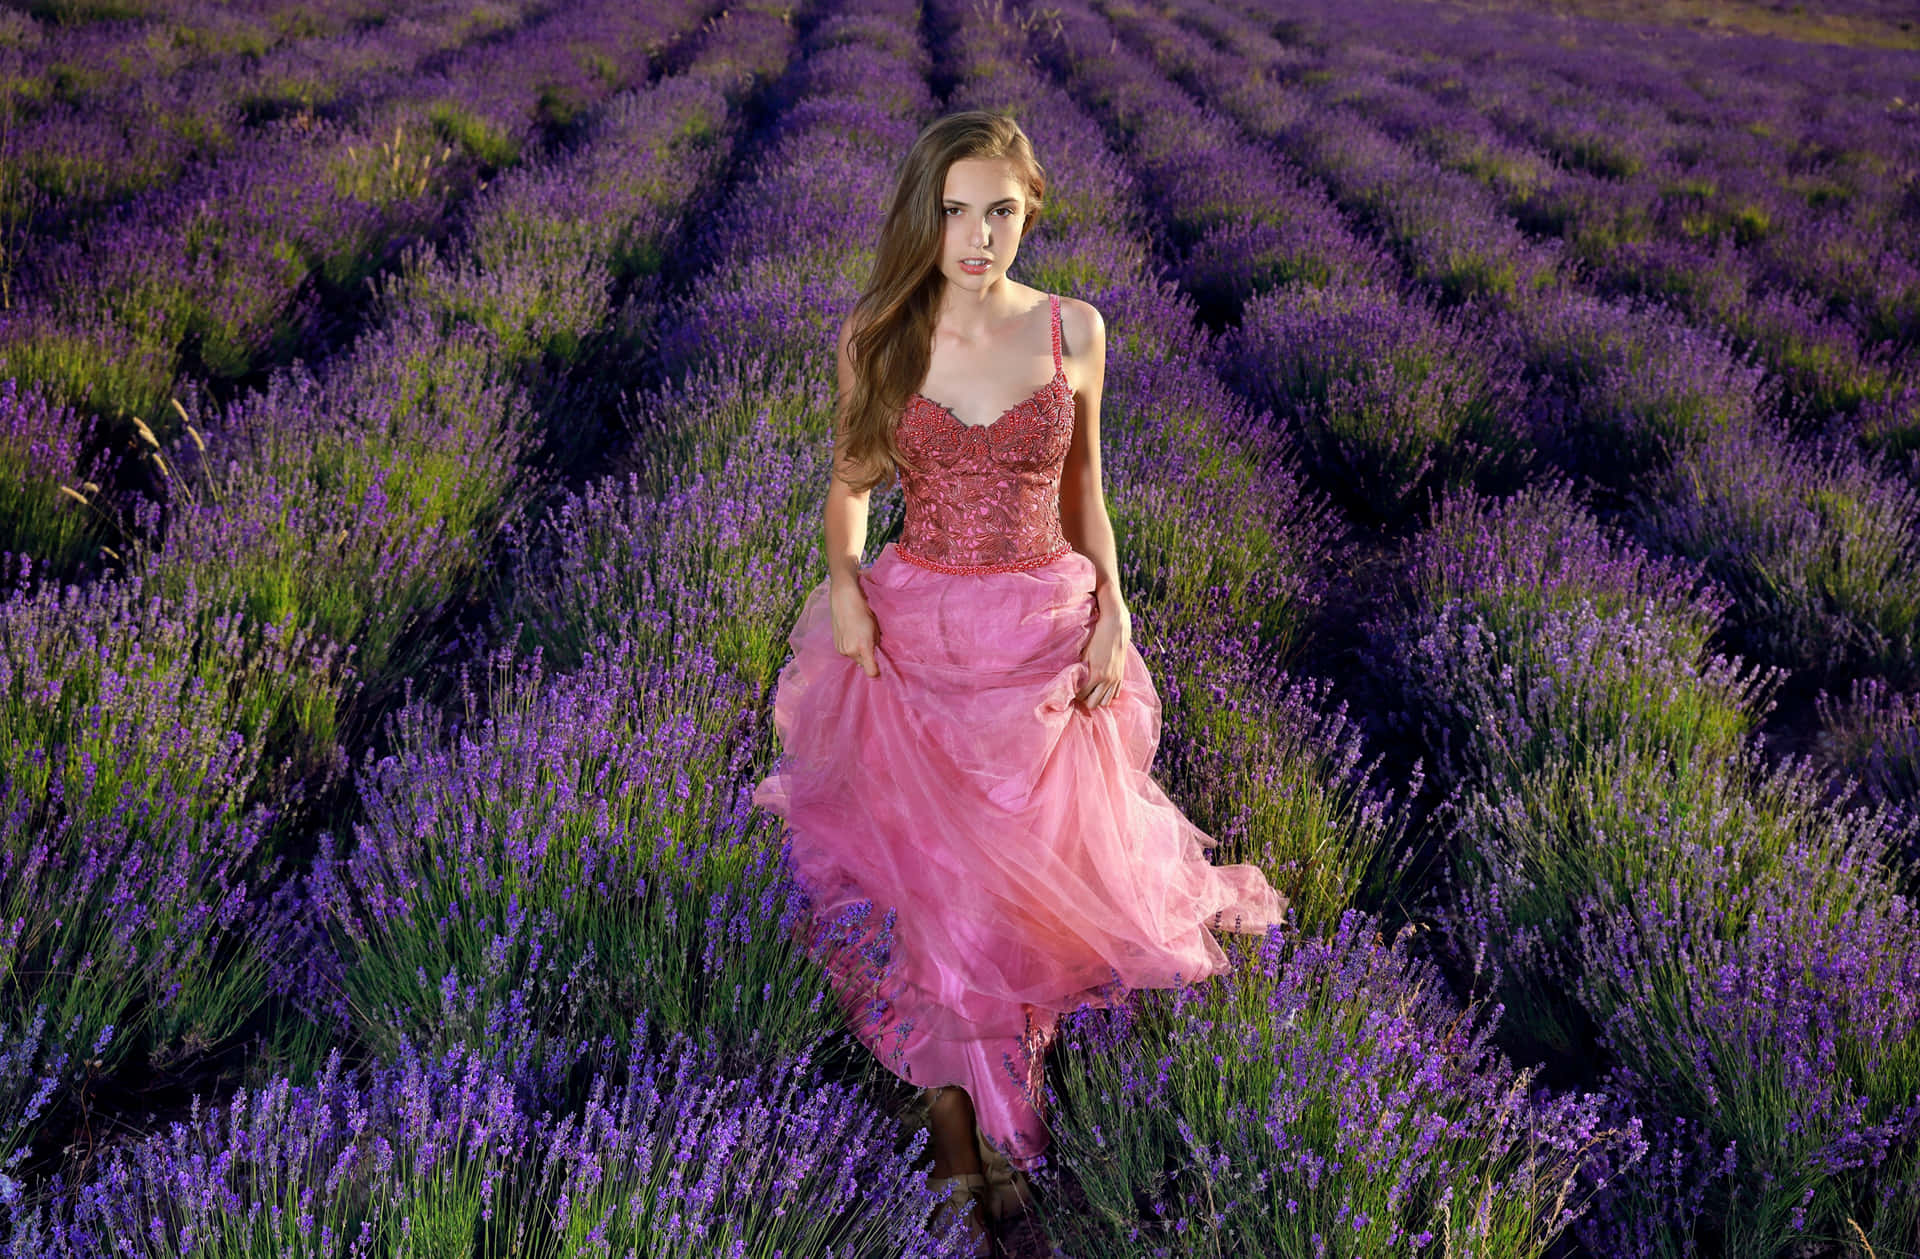 Experience the beauty of Lavender Fields Wallpaper